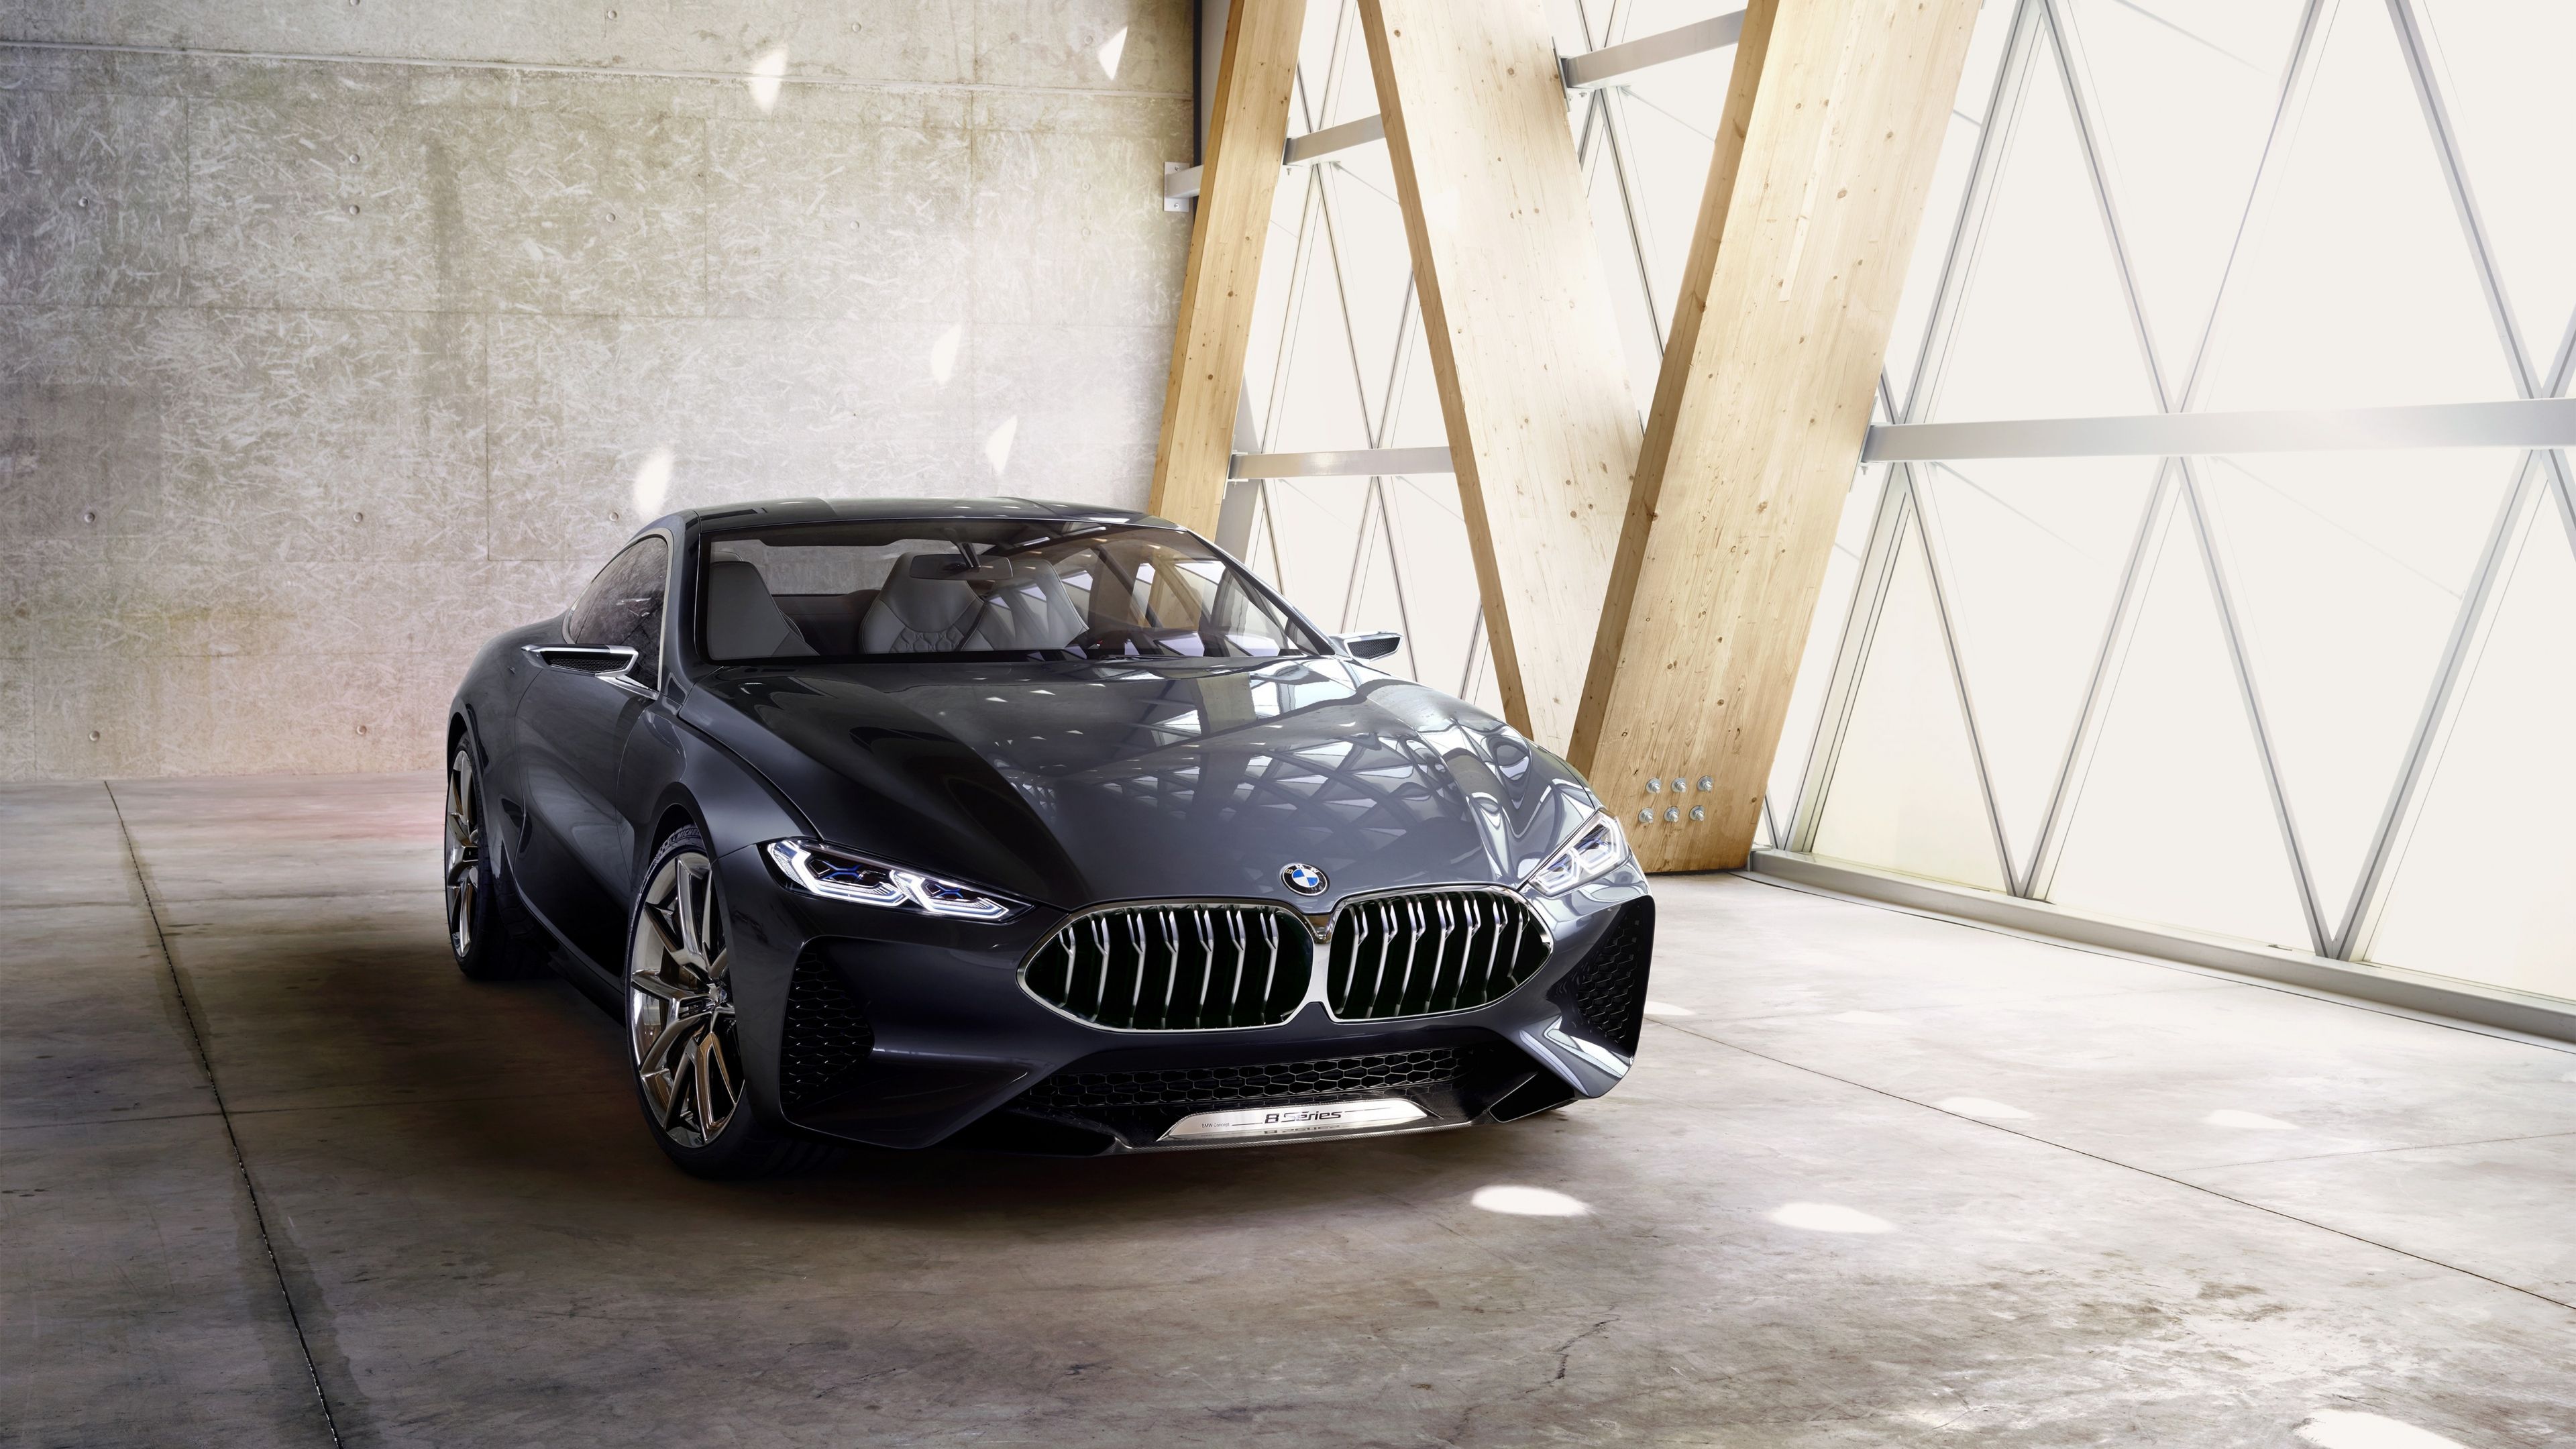 Download 3840x2160 wallpaper bmw concept 8 series, showroom, front, 4k, uhd 16: widescreen, 3840x2160 HD image, background, 5583